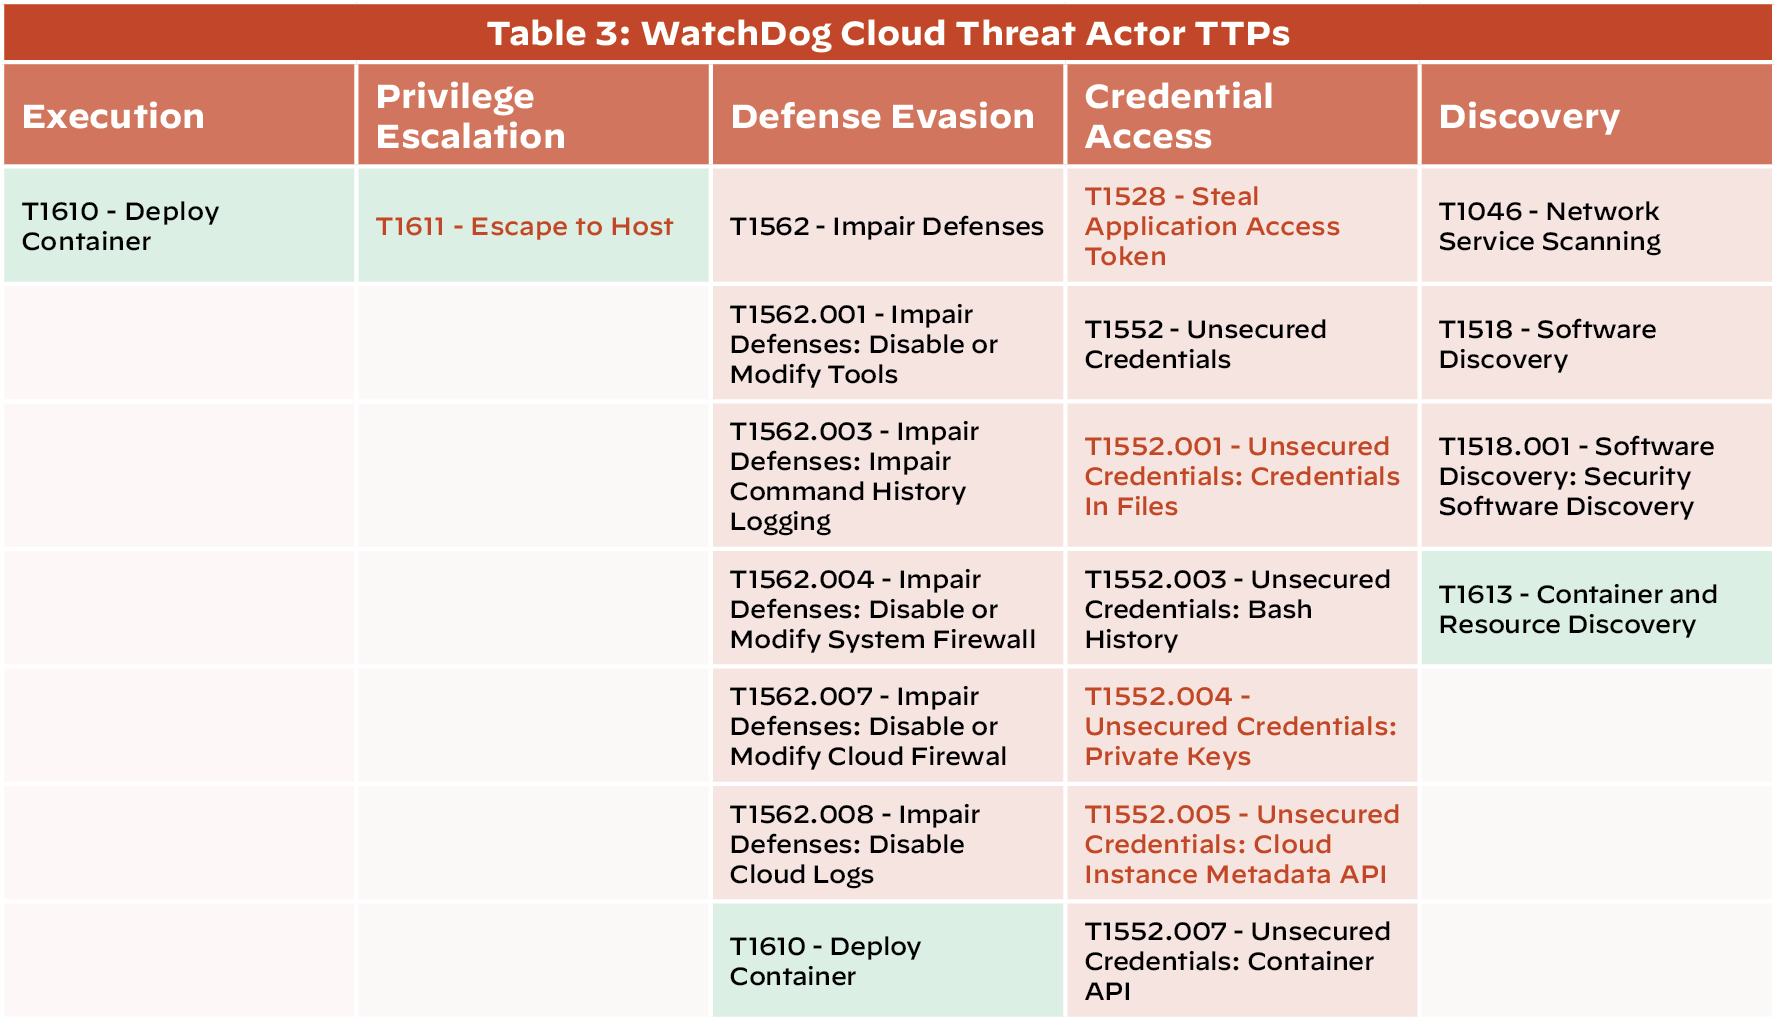 WatchDog Cloud Threat Actor TTPs: Execution - T1610 - Deploy Container; Privilege Escalation - T1611 - Escape to Host; Defense Evasion - T1562 - Impair Defenses, T1562.001 - Impair Defenses: Impair Command History Logging, T1562.004 - Impair Defenses: Disable or Modify System Firewall, T1562.007 - Impair Defenses: Disable or Modify Cloud Firewall, T1562.008 - Impair Defenses: Disable Cloud Logs, T1610 - Deploy Container; Credential Access - T1528 - Steal Application Access Token, T1552 - Unsecured Credentials, T1552.001 - Unsecured Credentials: Credentials in Files, T1552.003 - Unsecured Credentials: Bash History, T1552.004 - Unsecured Credentials: Private Keys, T1552.005 - Unsecured Credentials: Cloud Instance Metadata API, T1552.007 - Unsecured Credentials: Container API; Discovery - T1046 - Network Service Scanning, T1518 - Software Discovery, T1518.001 - Software Discovery: Security Software Discovery, T1613 - Container and Resource Discovery